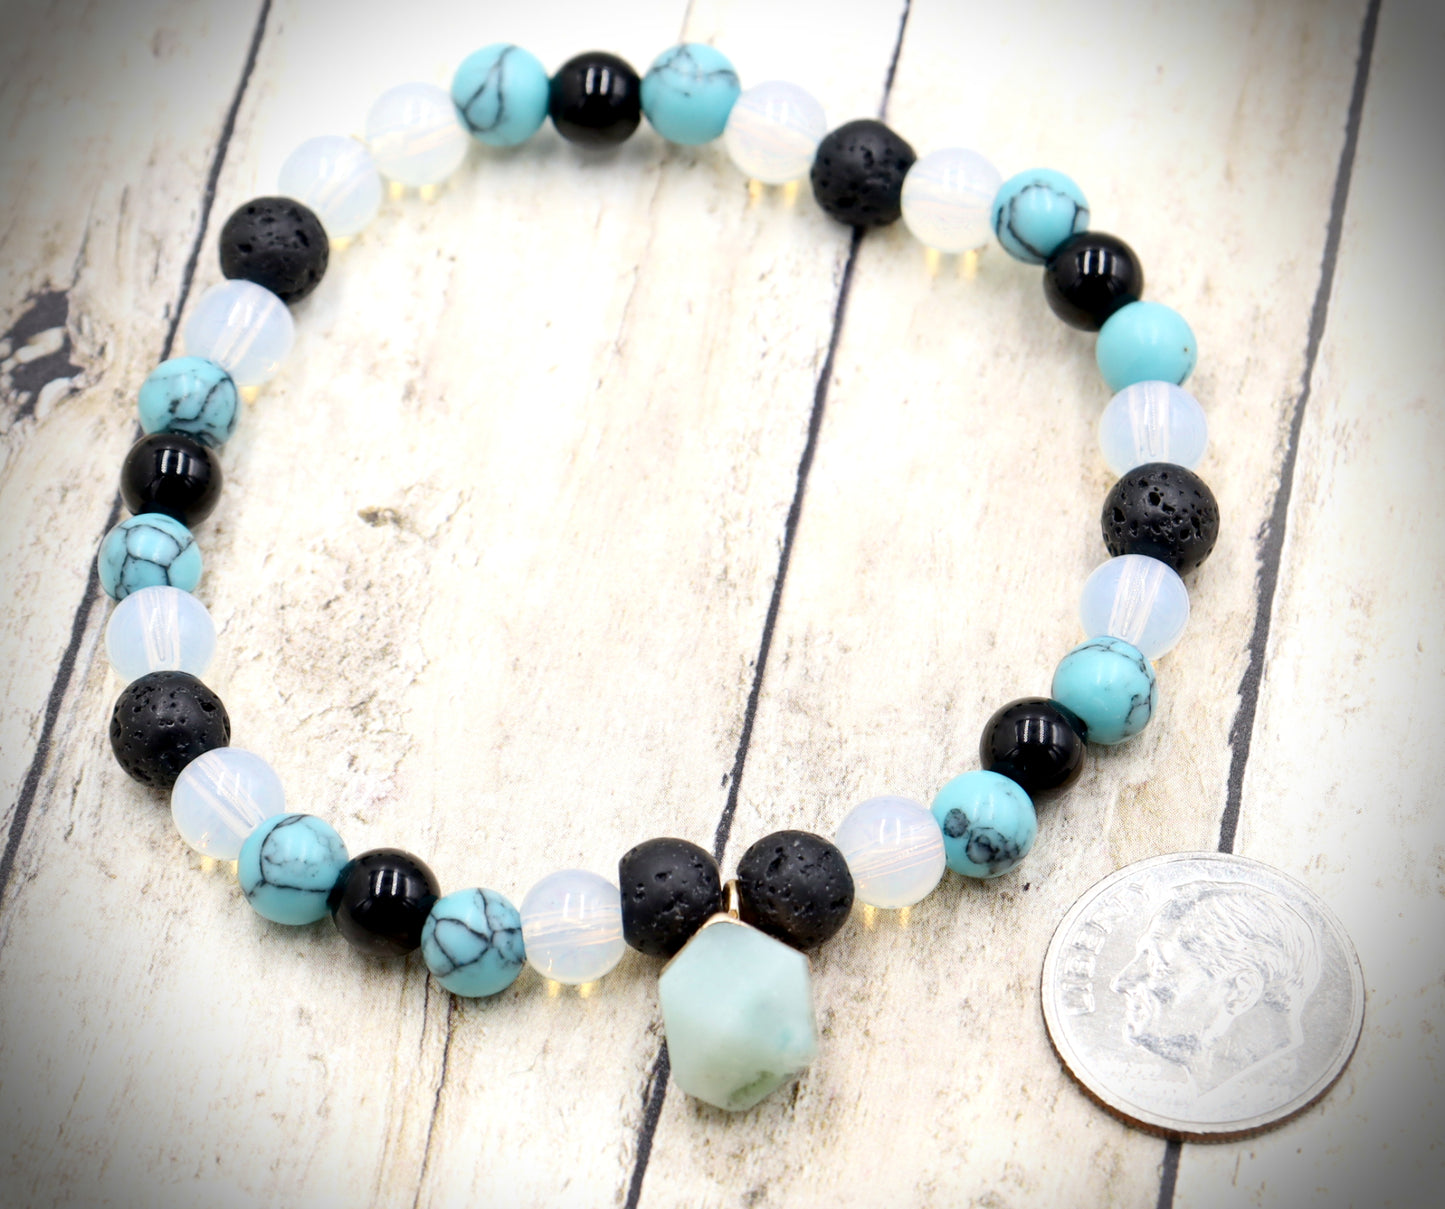 Head Over the Moon for Turquoise Blue and Black Lava Rock Golden Geometric Charm Bracelet